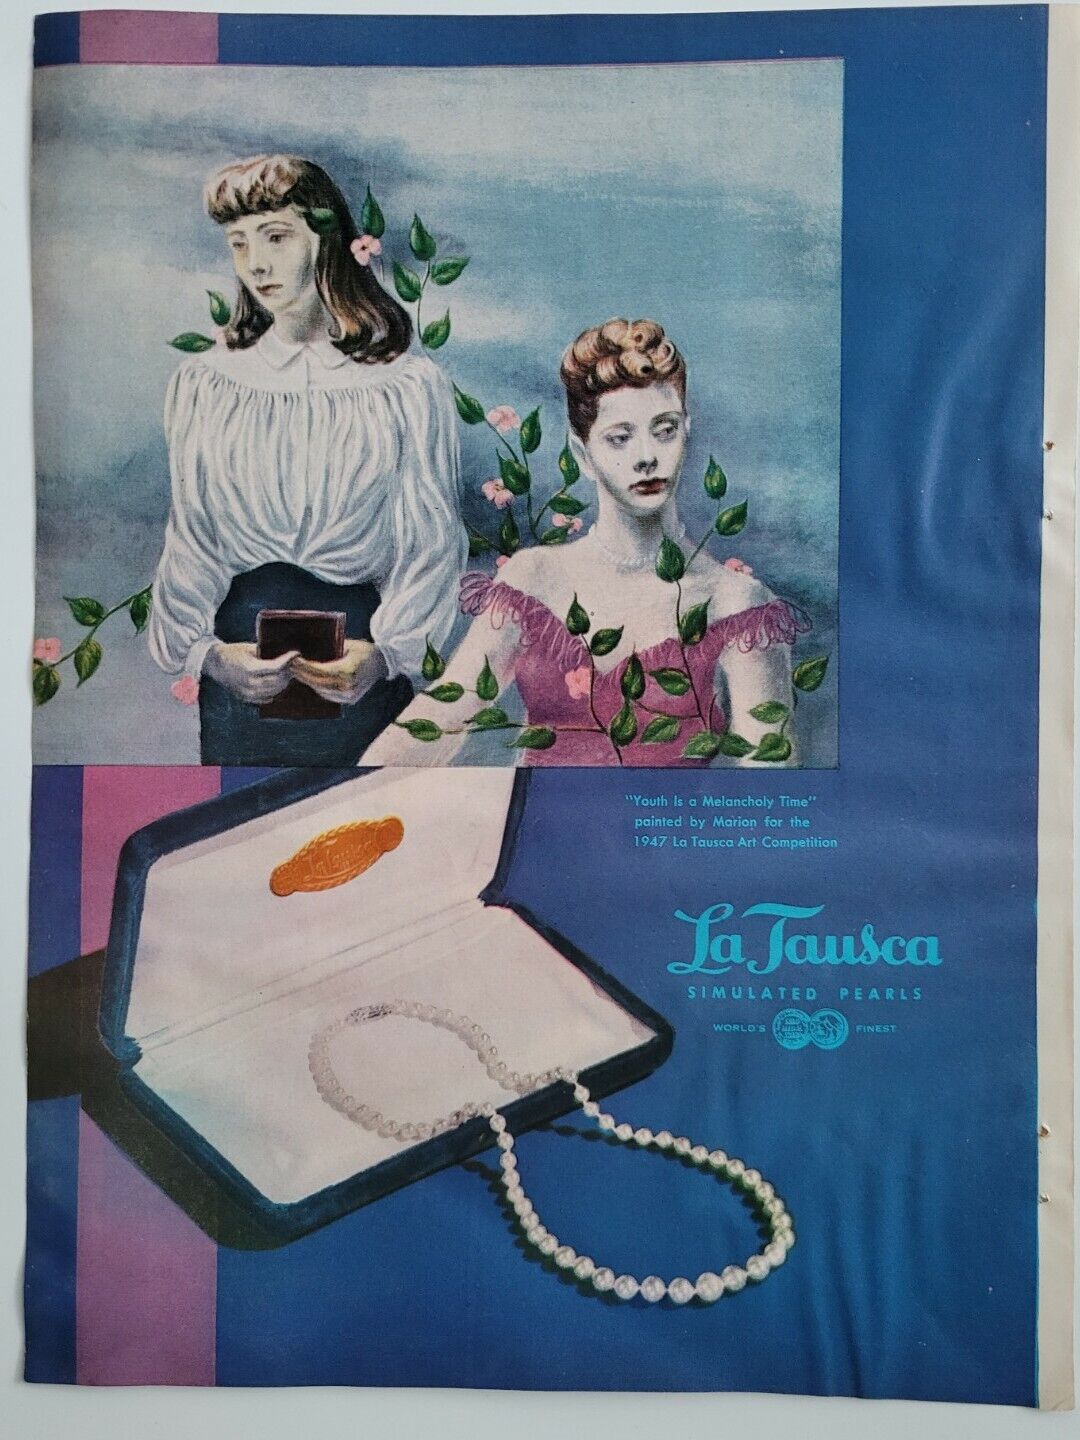 1947 La Tausca simulated pearl necklace vintage jewelry ad